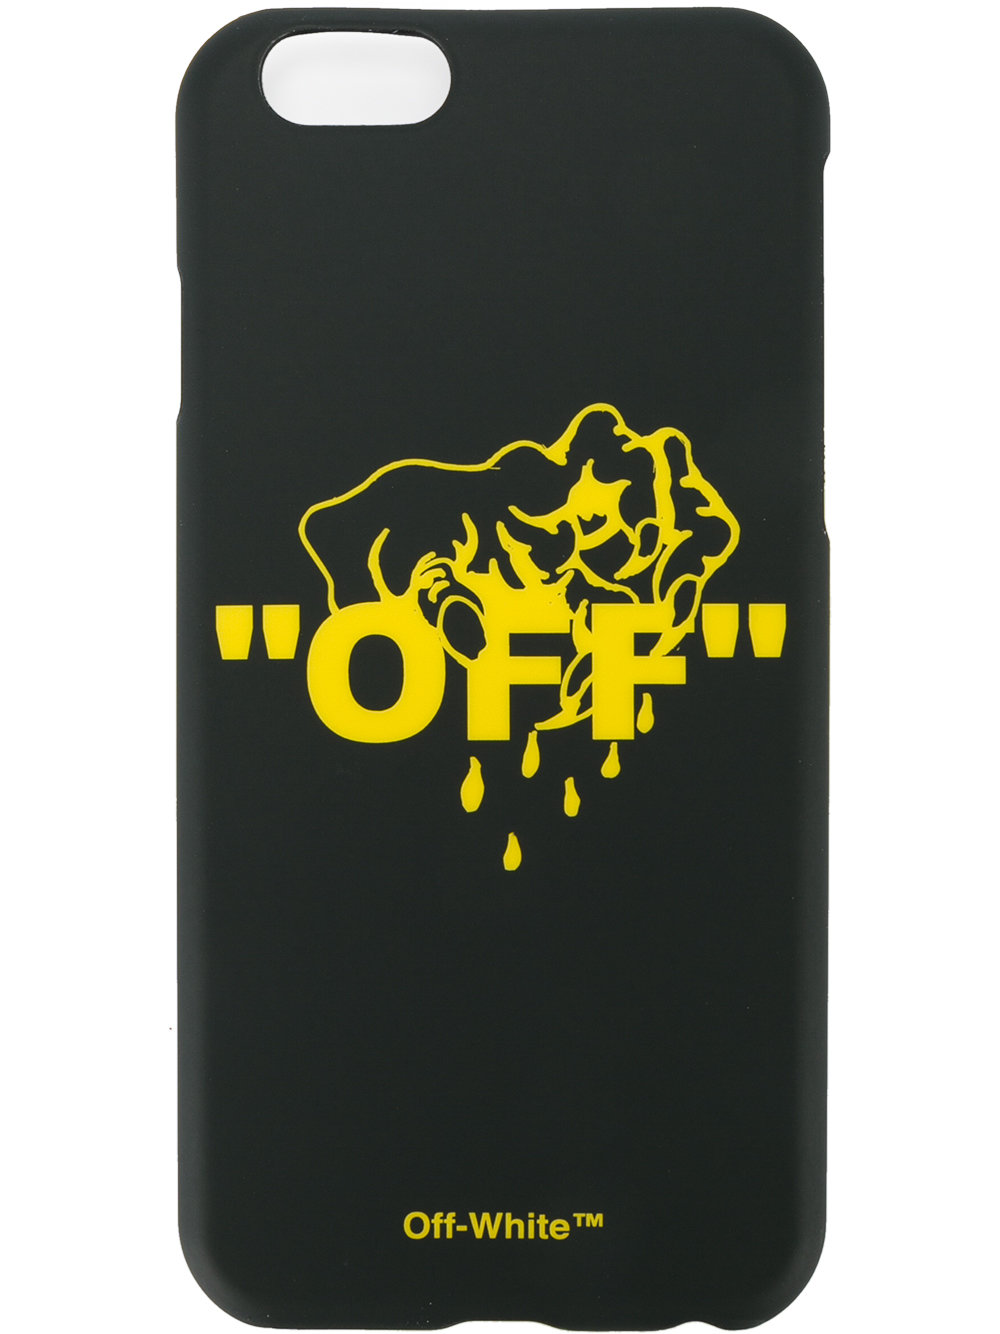 Off-White Hands Off iPhone 6 case Hottest New Styles BLACK Women Lifestyle Phone Computer & Gadgets